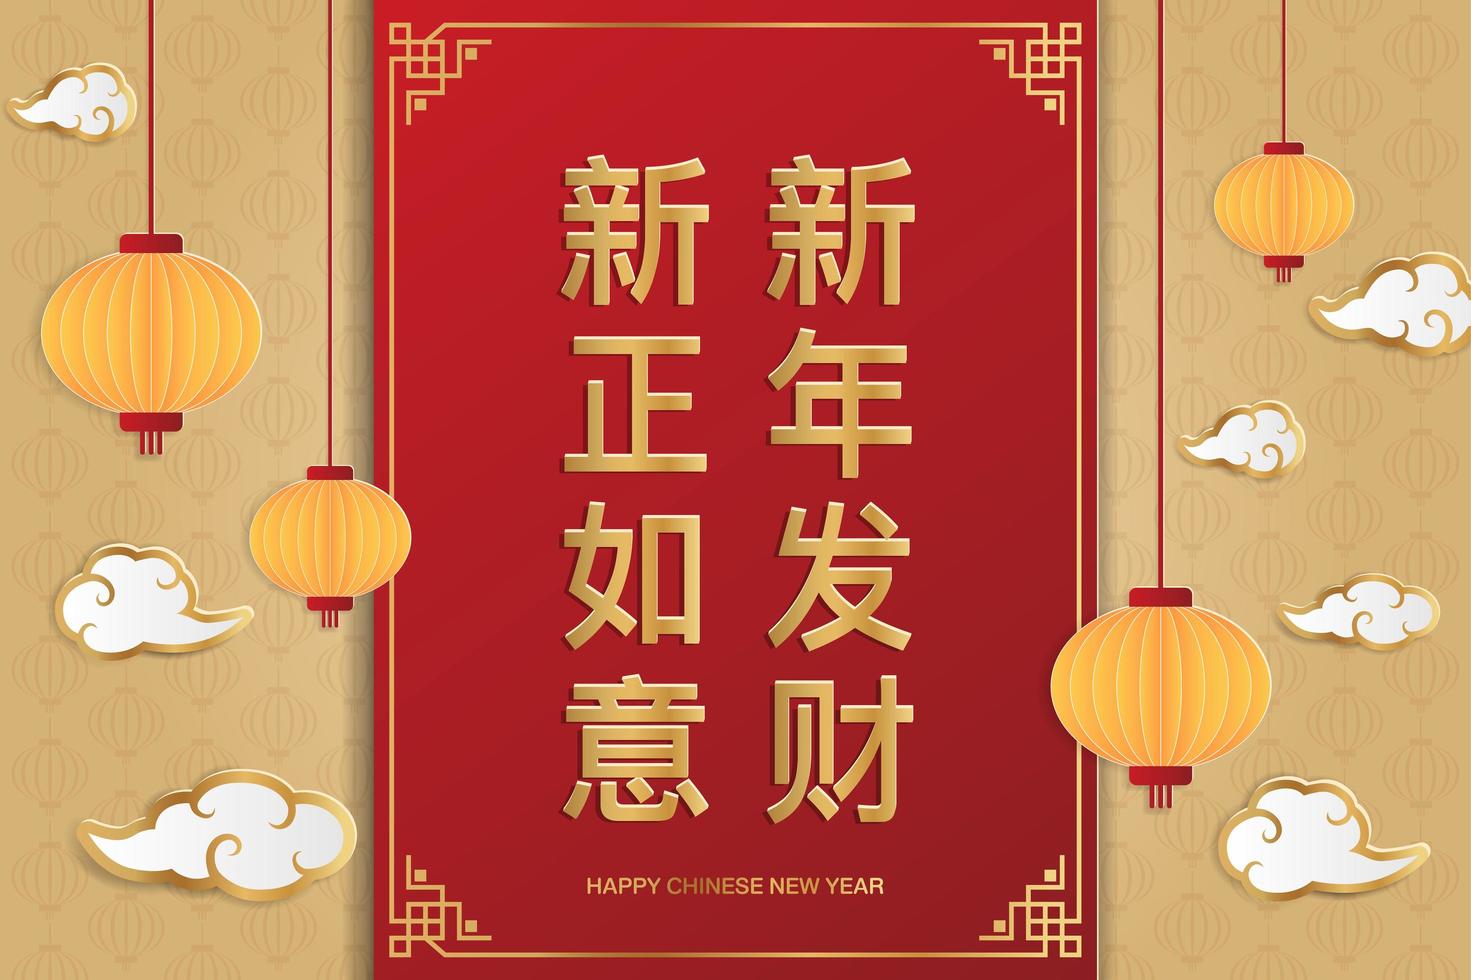 Chinese new year greeting card with lantern vector